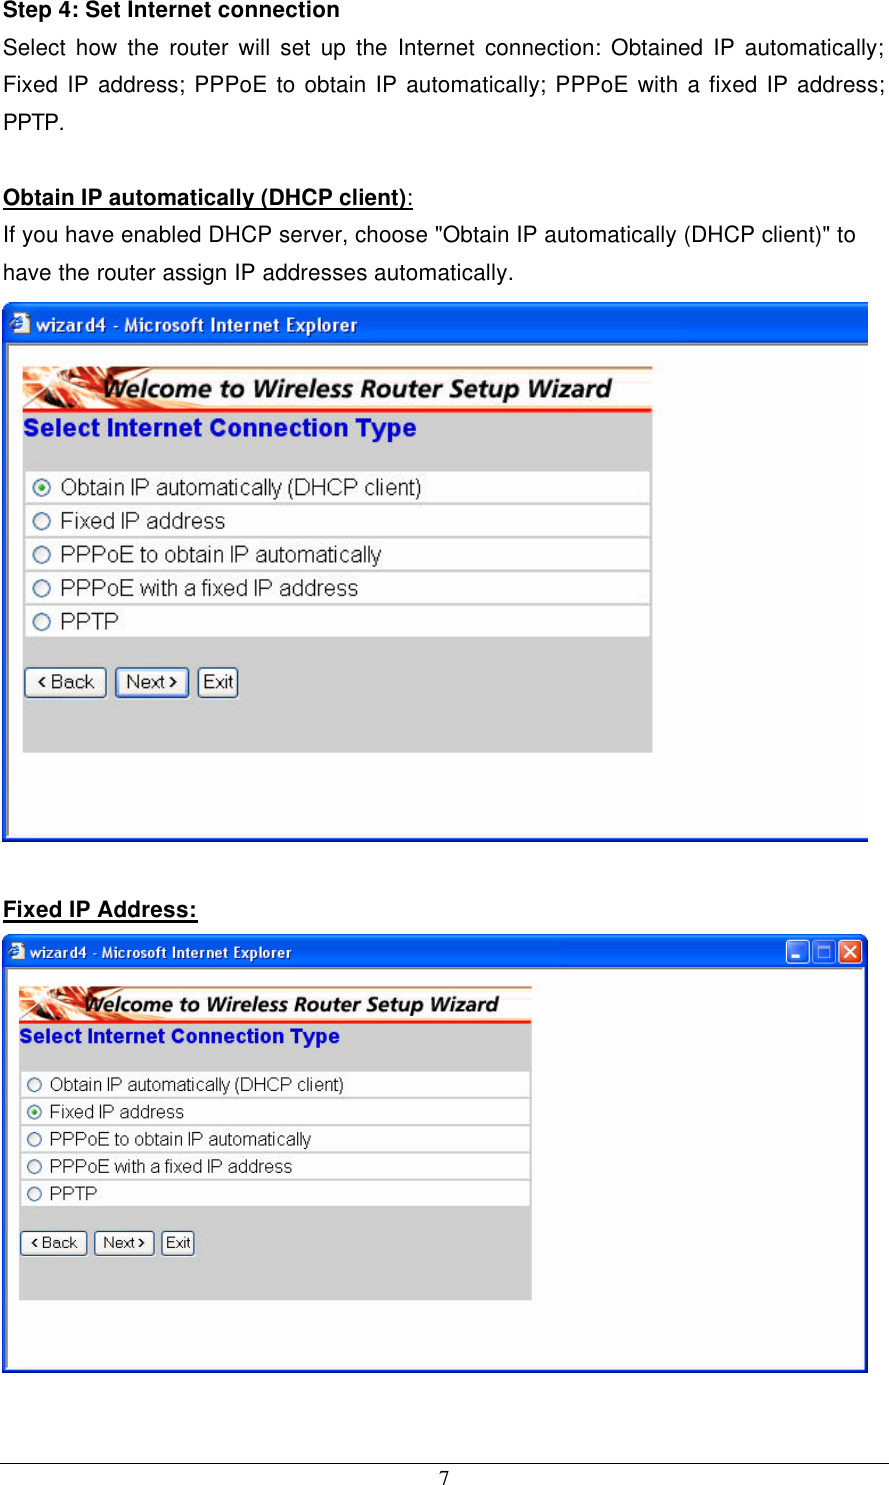 7 Step 4: Set Internet connection Select how the router will set up the Internet connection: Obtained IP automatically; Fixed IP address; PPPoE to obtain IP automatically; PPPoE with a fixed IP address; PPTP.  Obtain IP automatically (DHCP client): If you have enabled DHCP server, choose &quot;Obtain IP automatically (DHCP client)&quot; to have the router assign IP addresses automatically.   Fixed IP Address:   